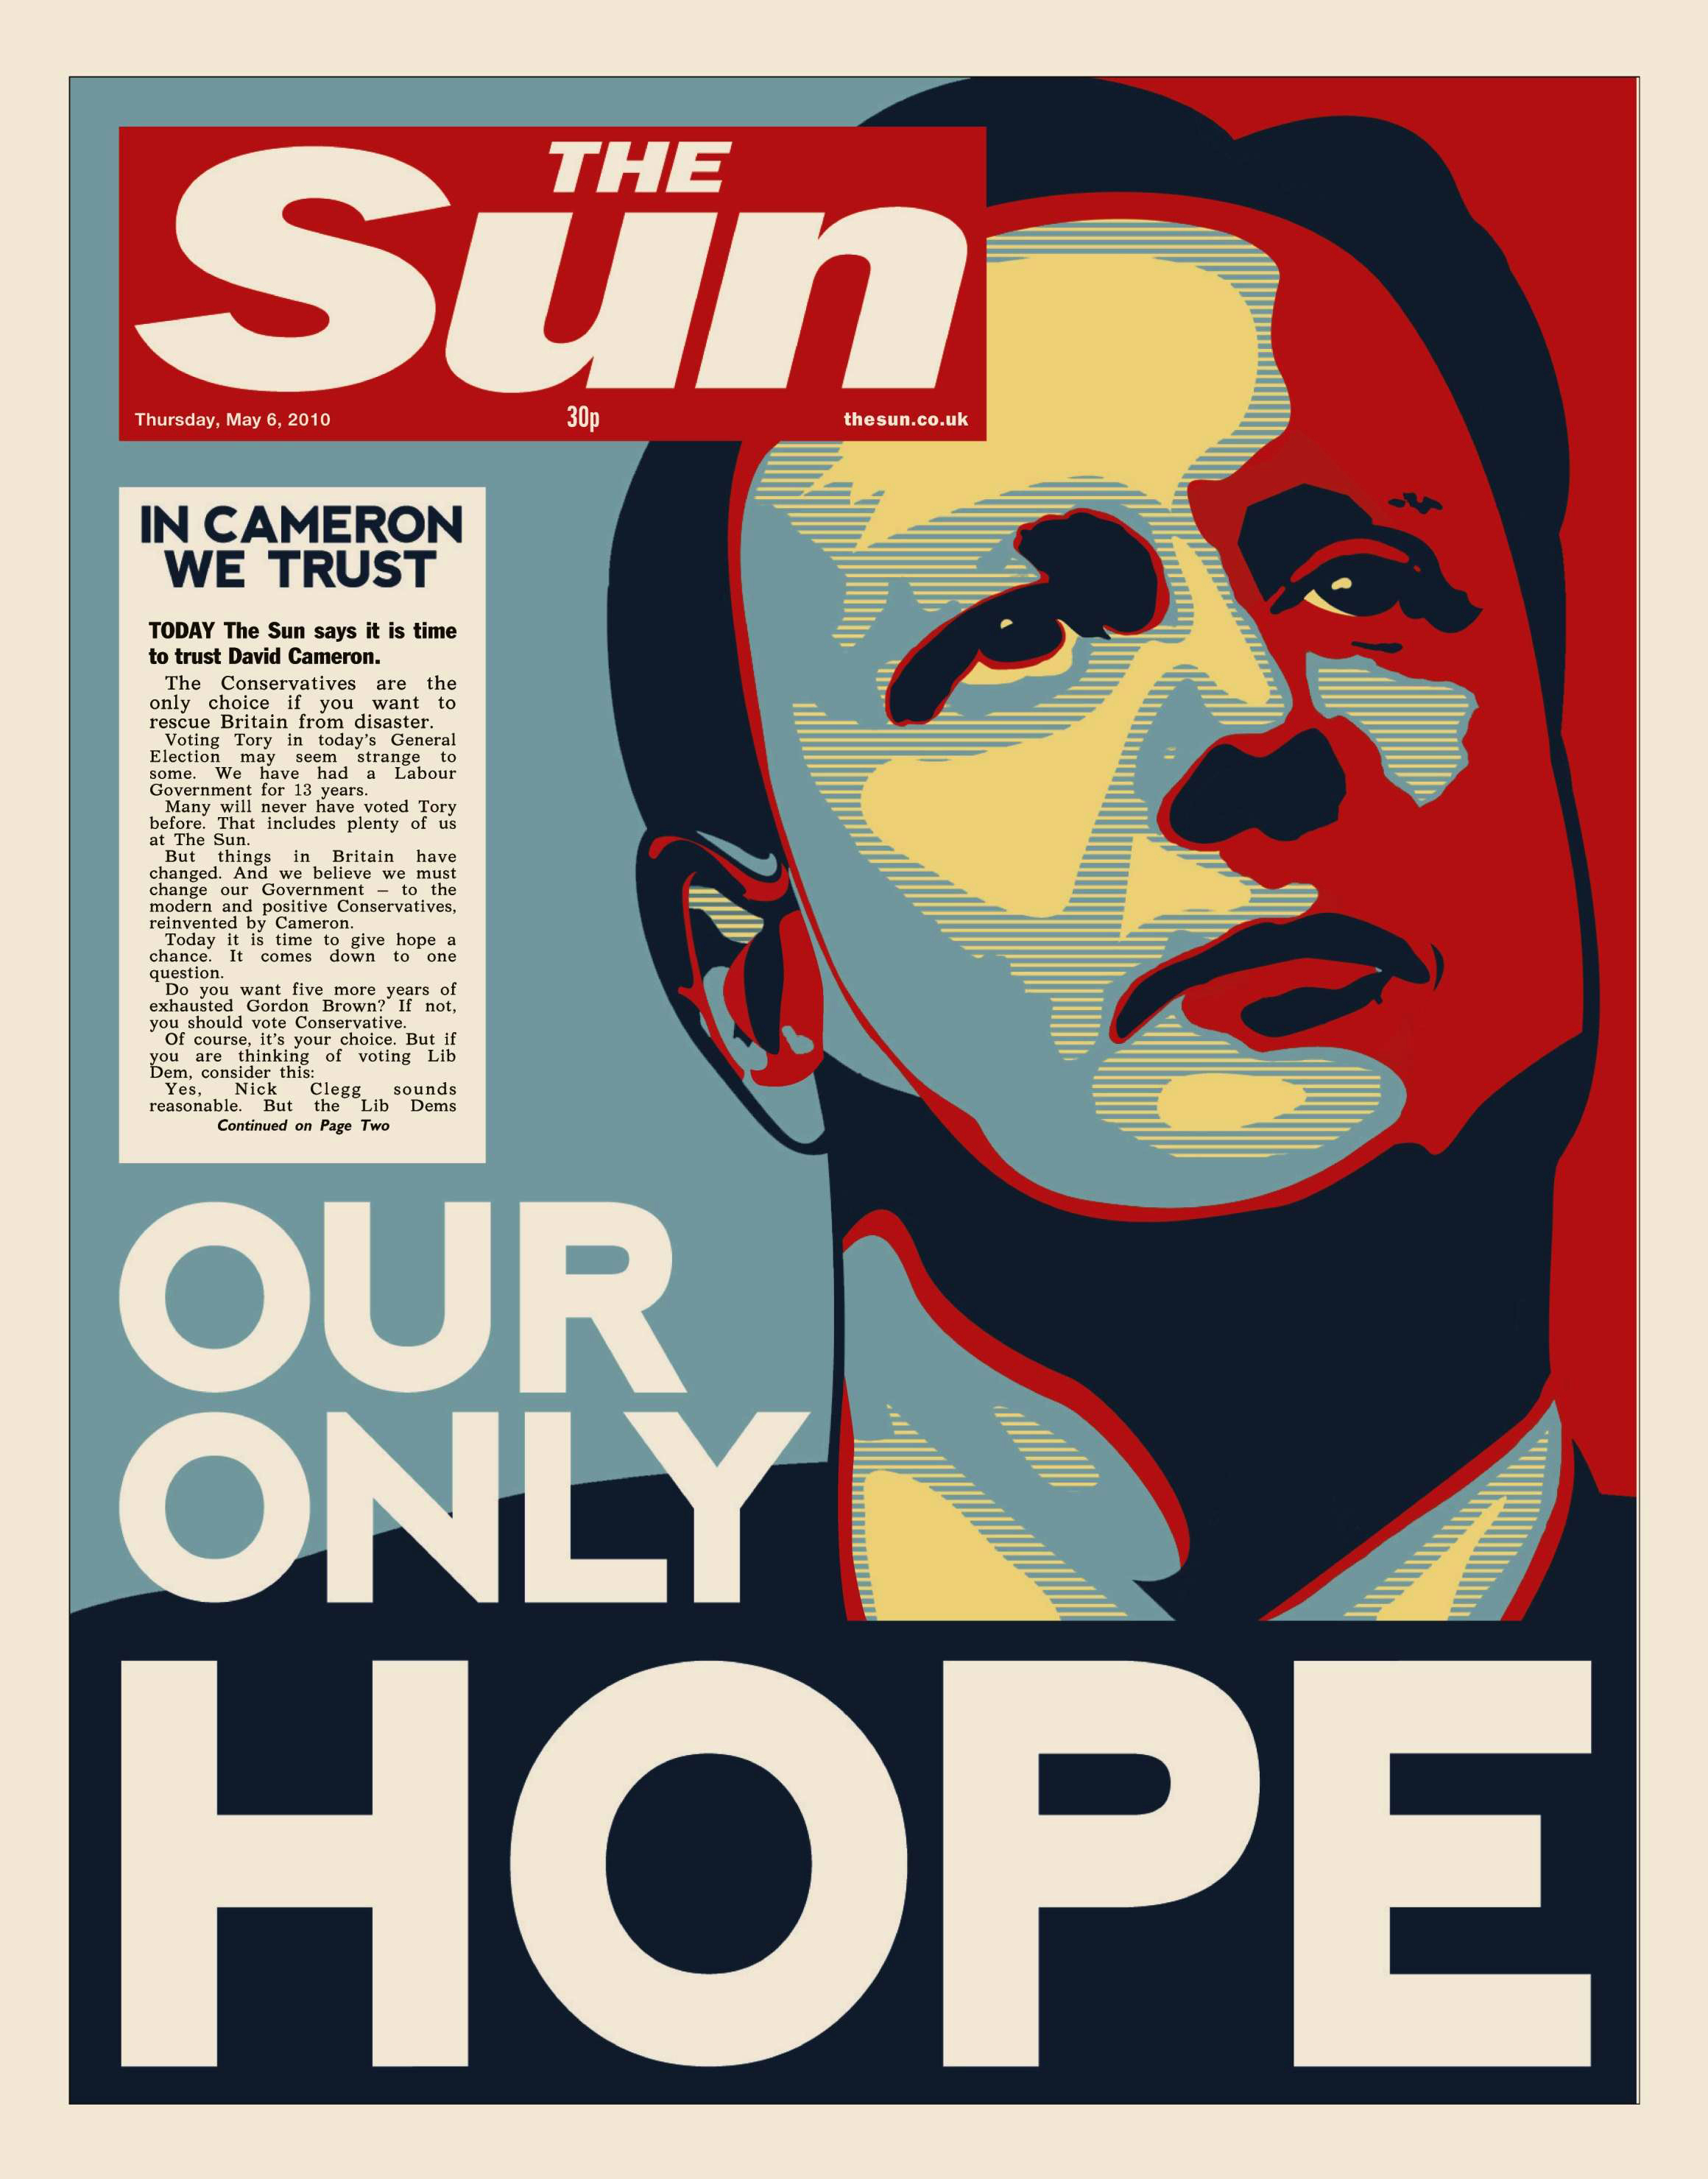 The cover of tomorrow's Sun newspaper features a Fairey'd treatment of conservative Cameron.